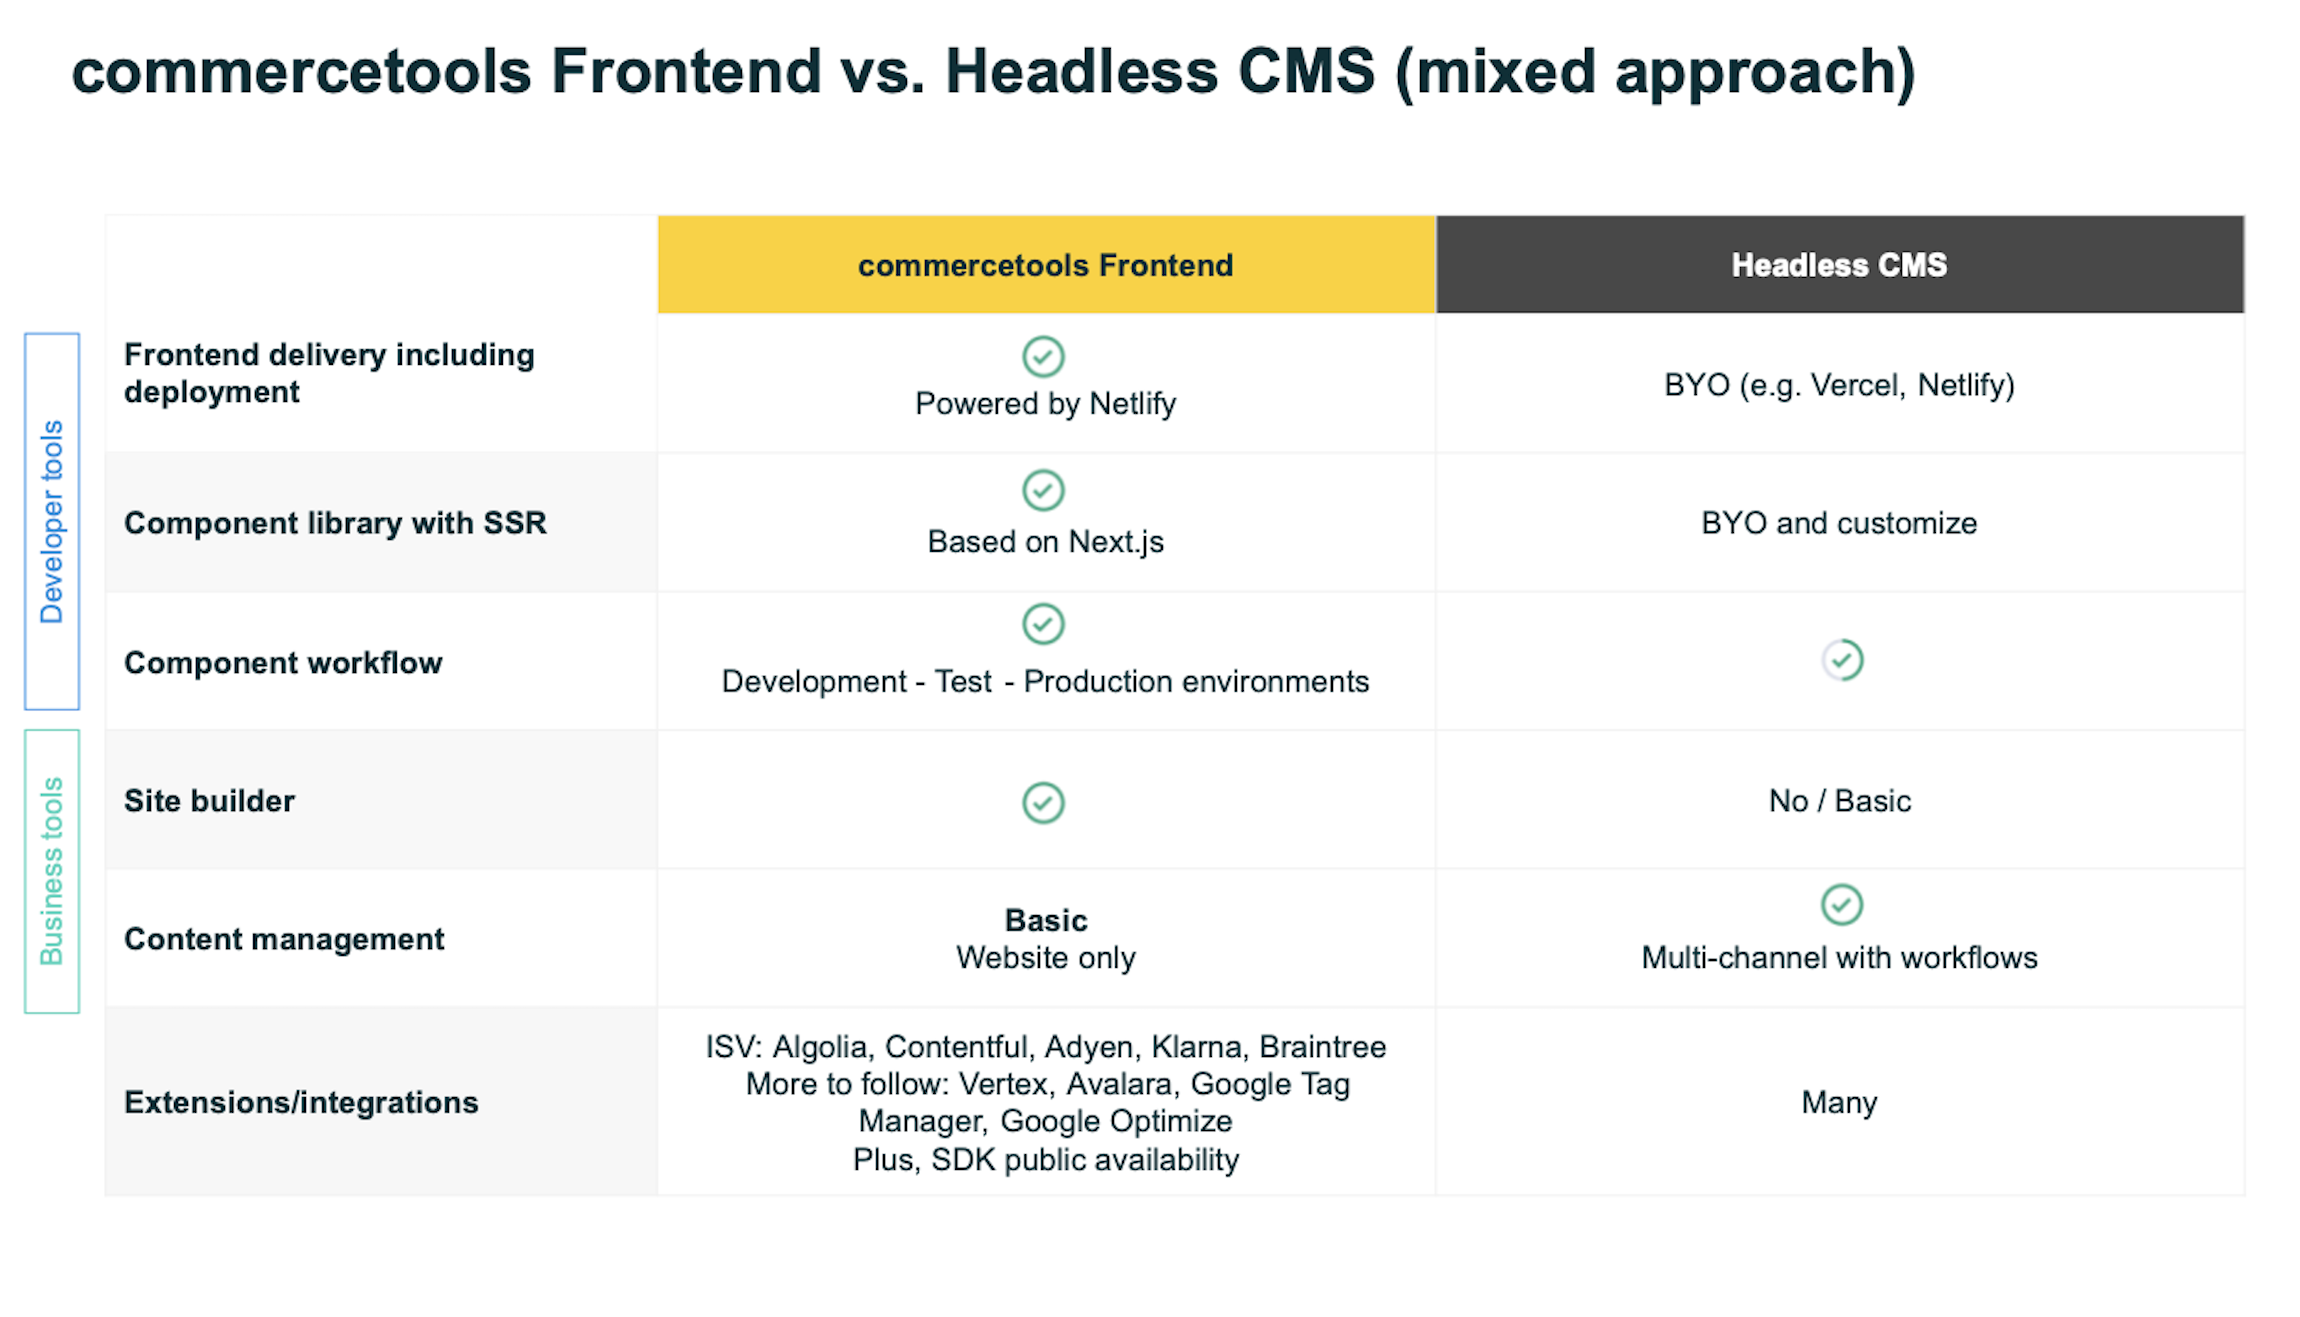 Combining commercetools Frontend with a headless CMS